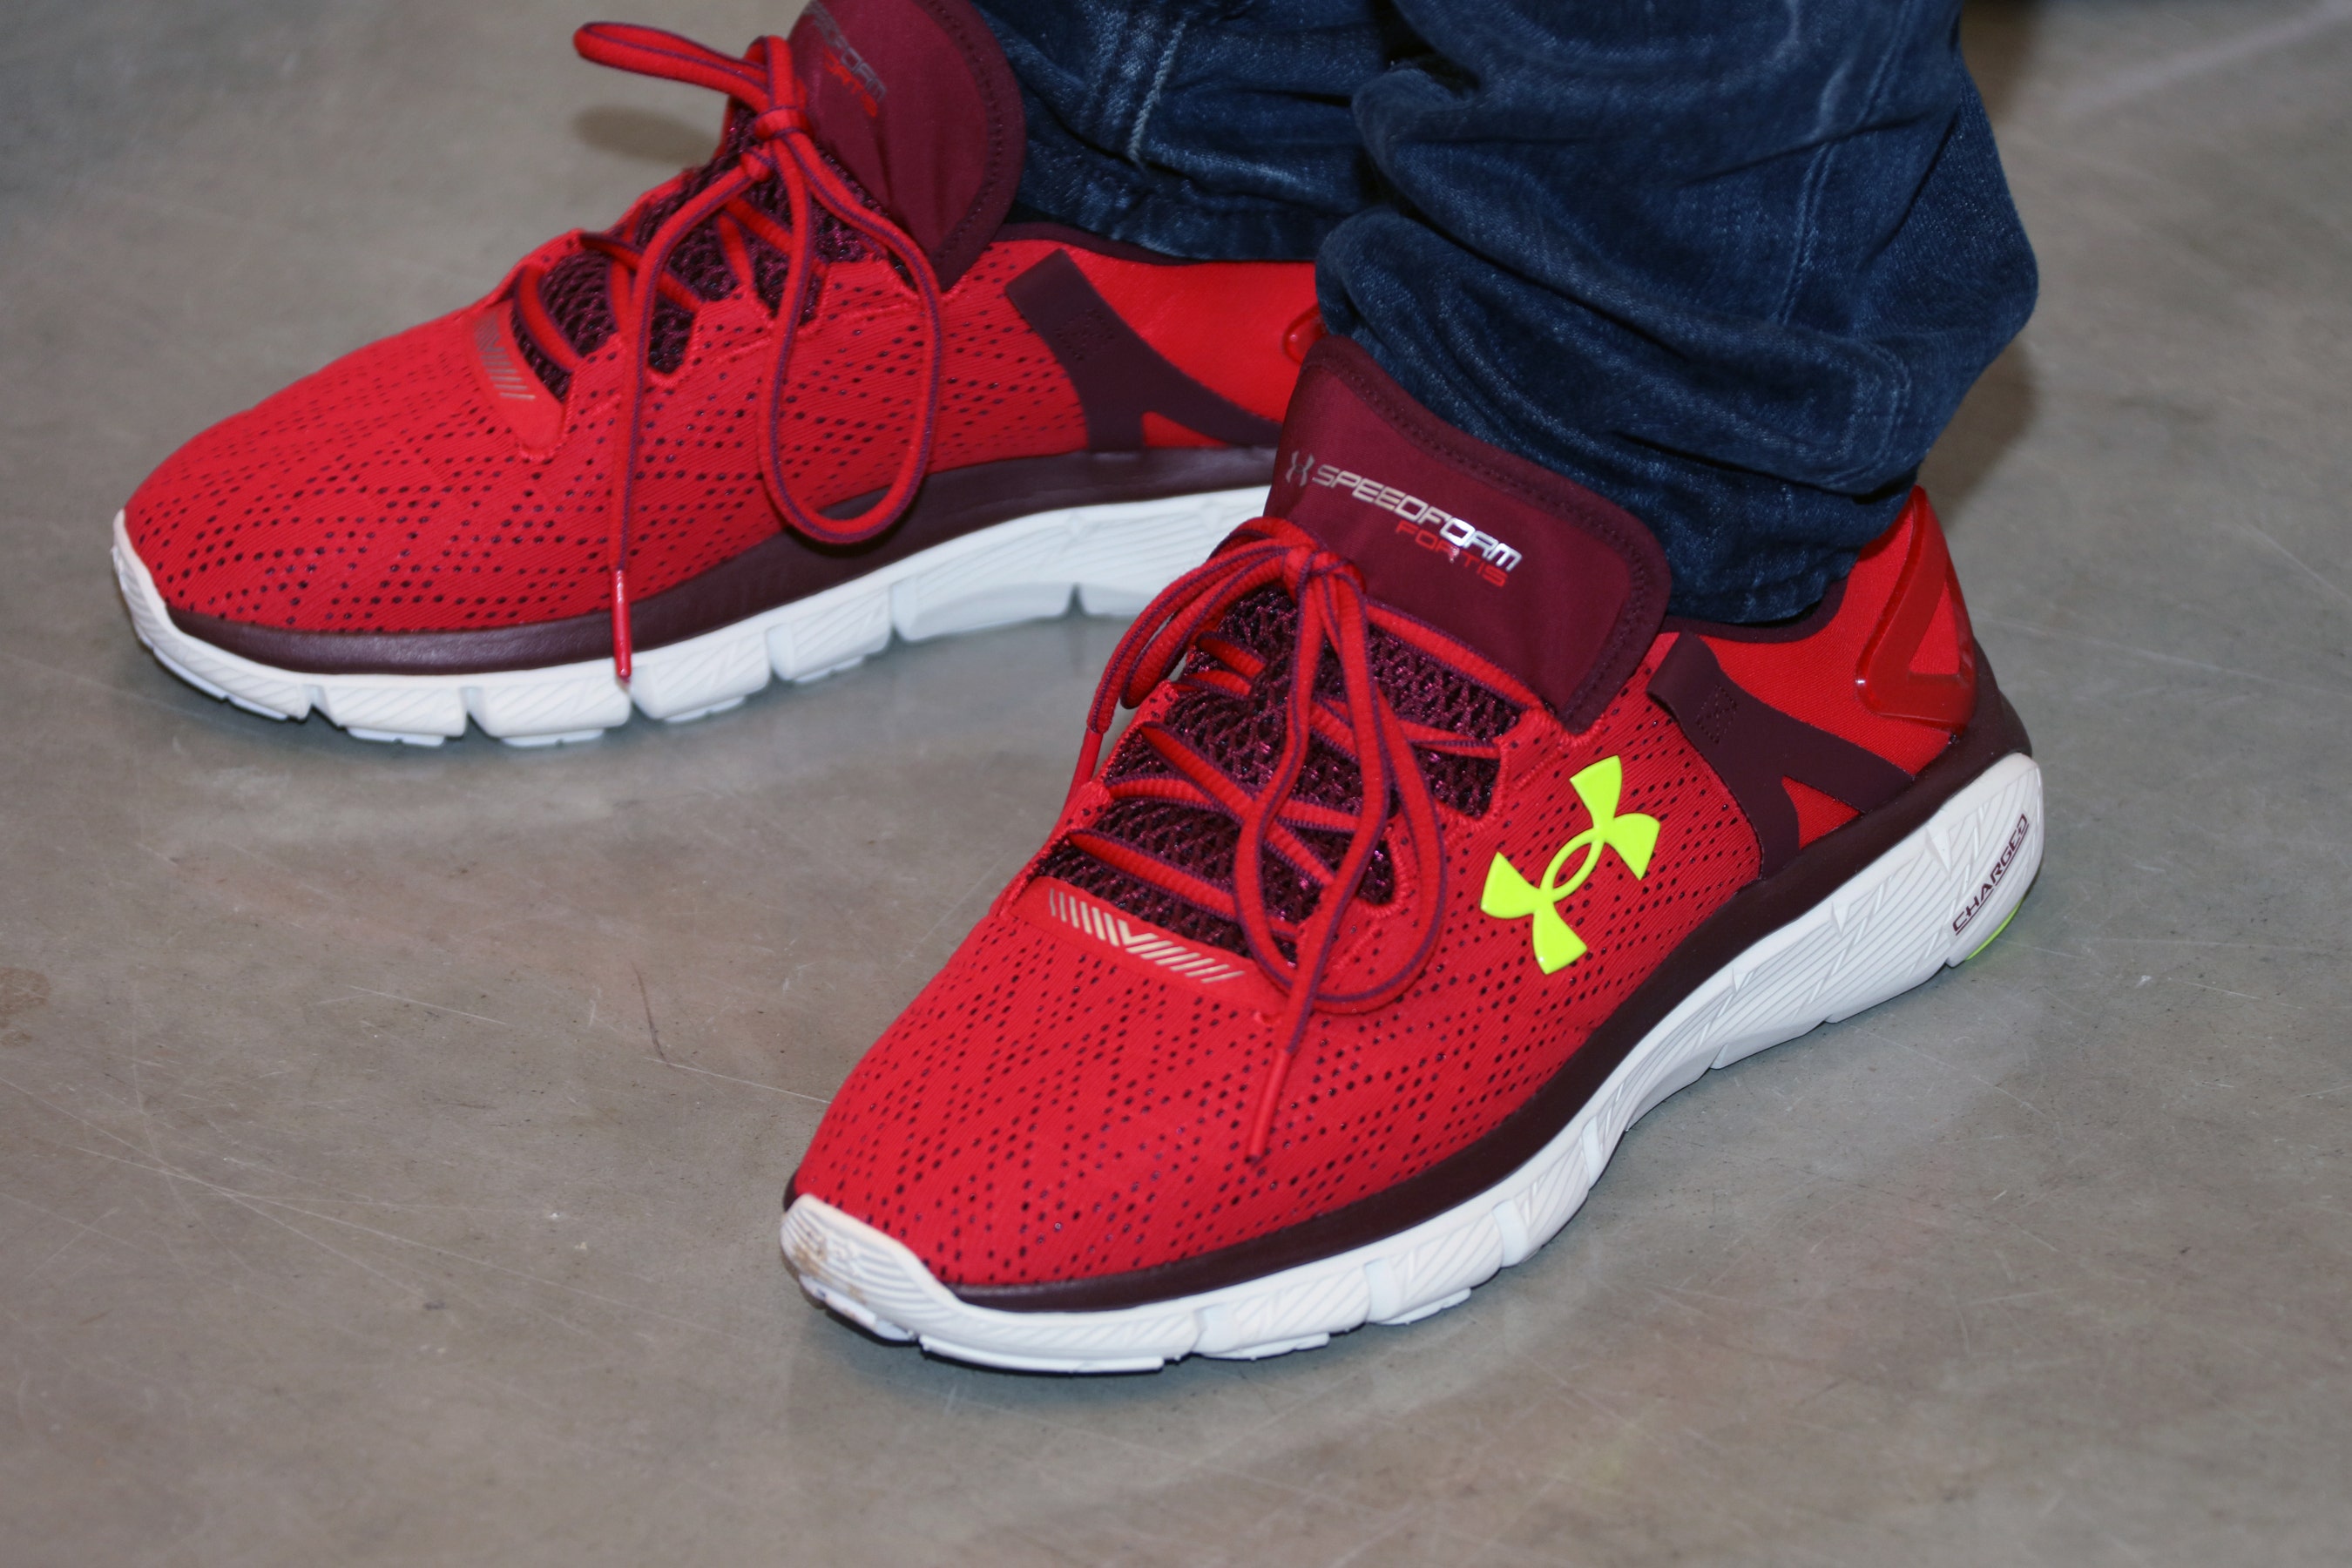 Read How Under Armour Fared In Q1